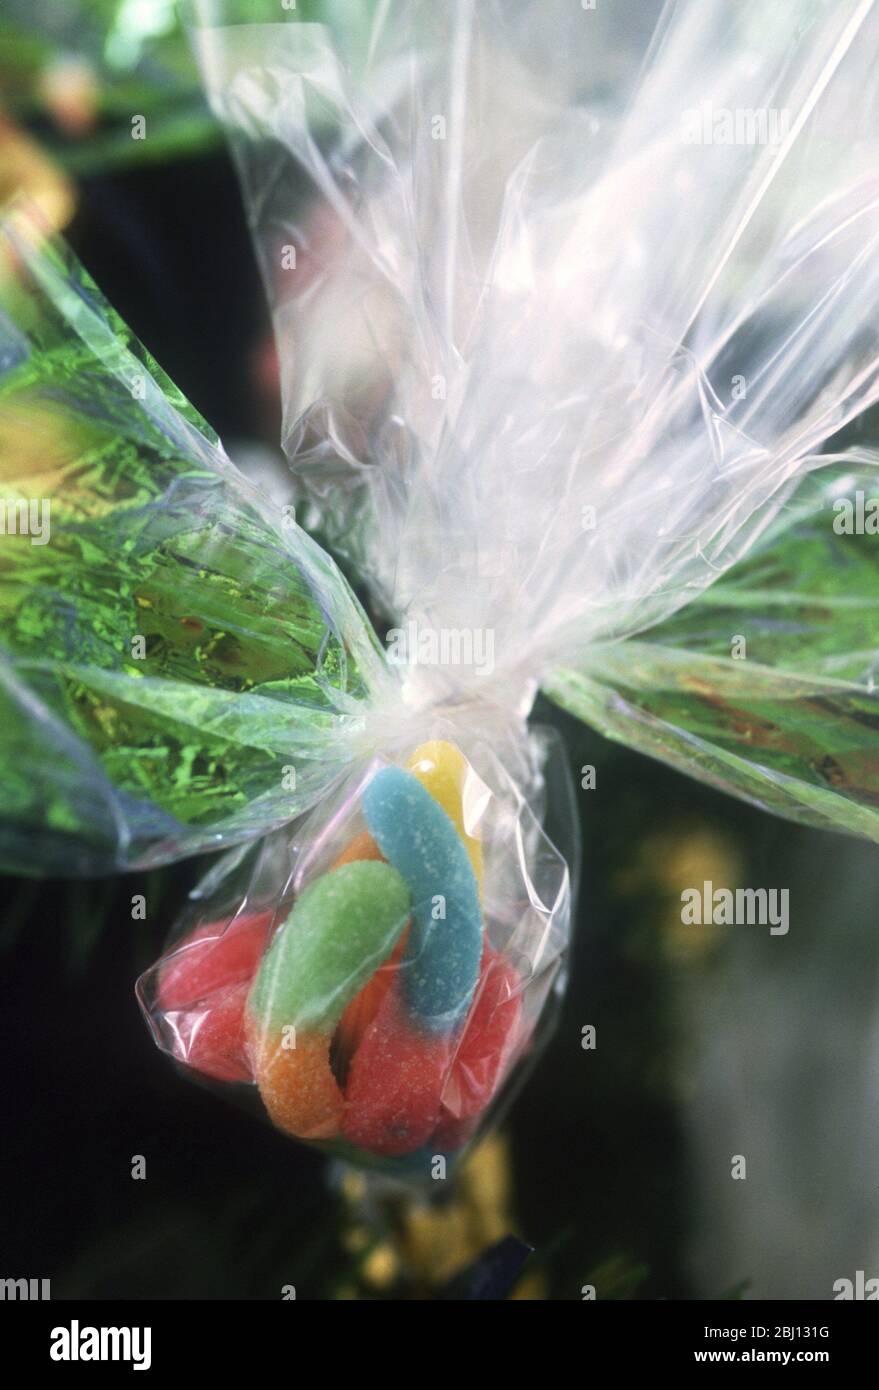 Sweets tied up in a net bundle and hanging as decoration on a Christmas tree - Stock Photo